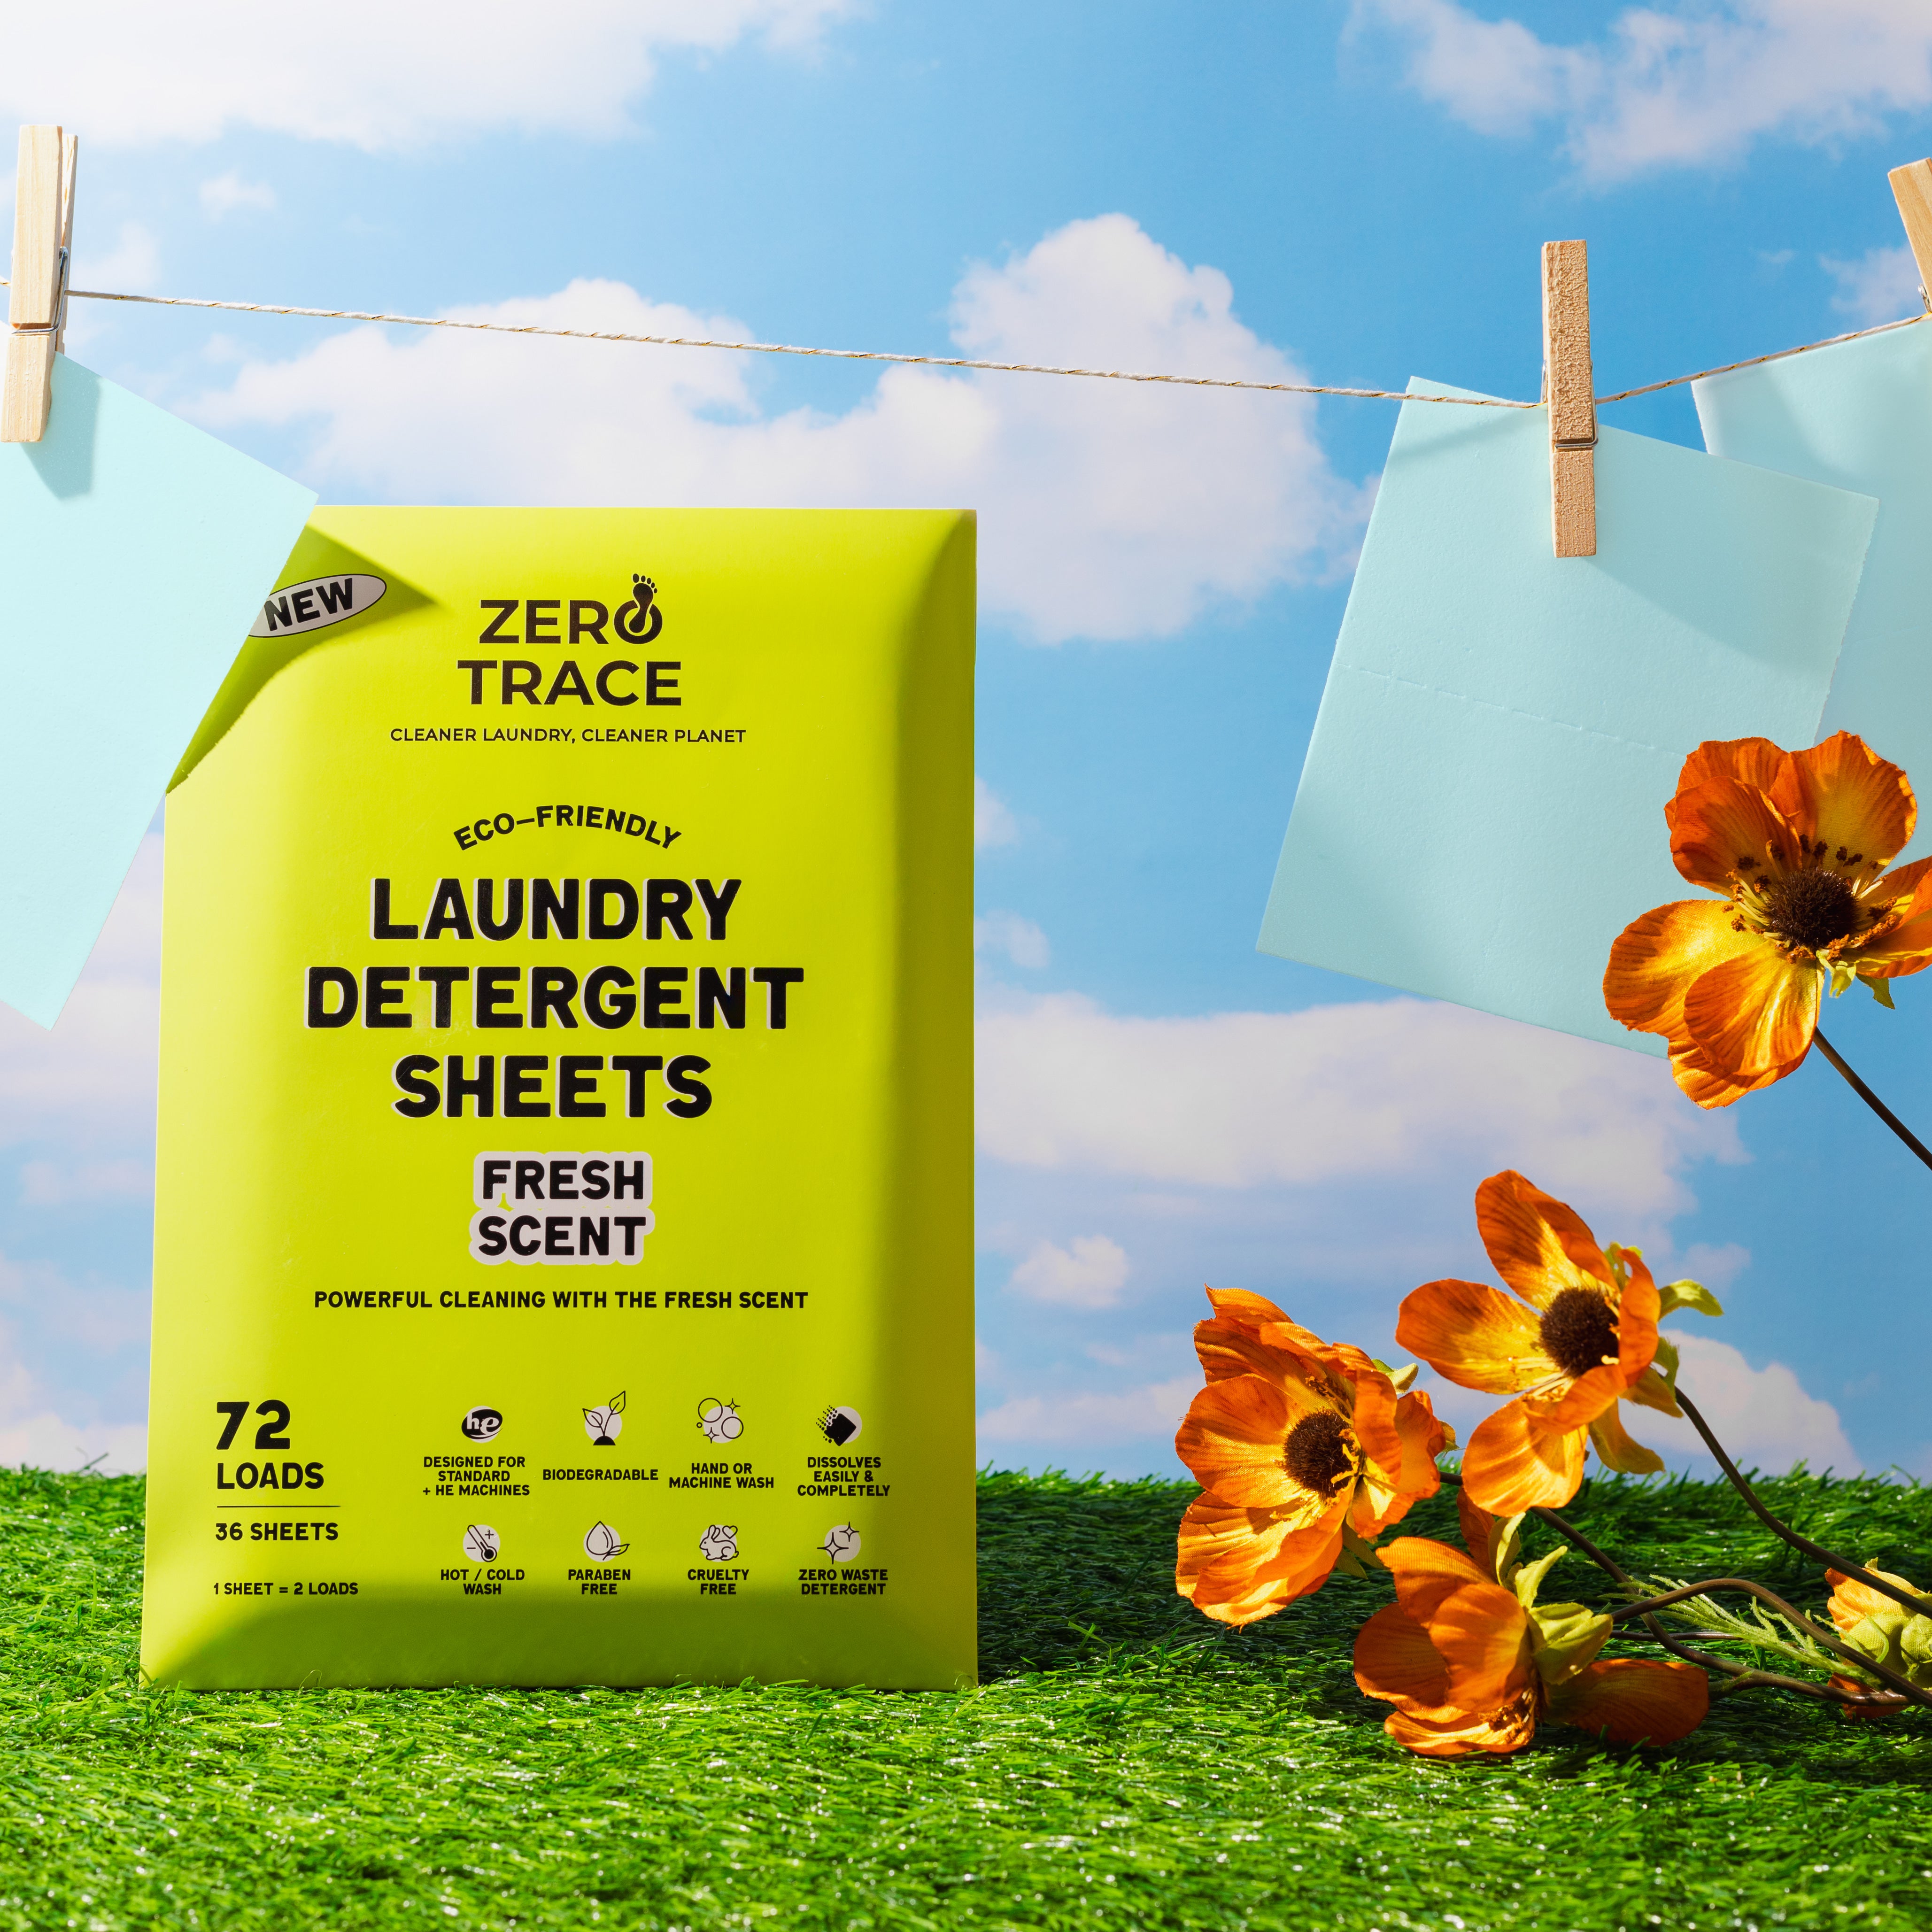 A yellow package of Zero Trace laundry detergent sheets next to a bunch of flowers.